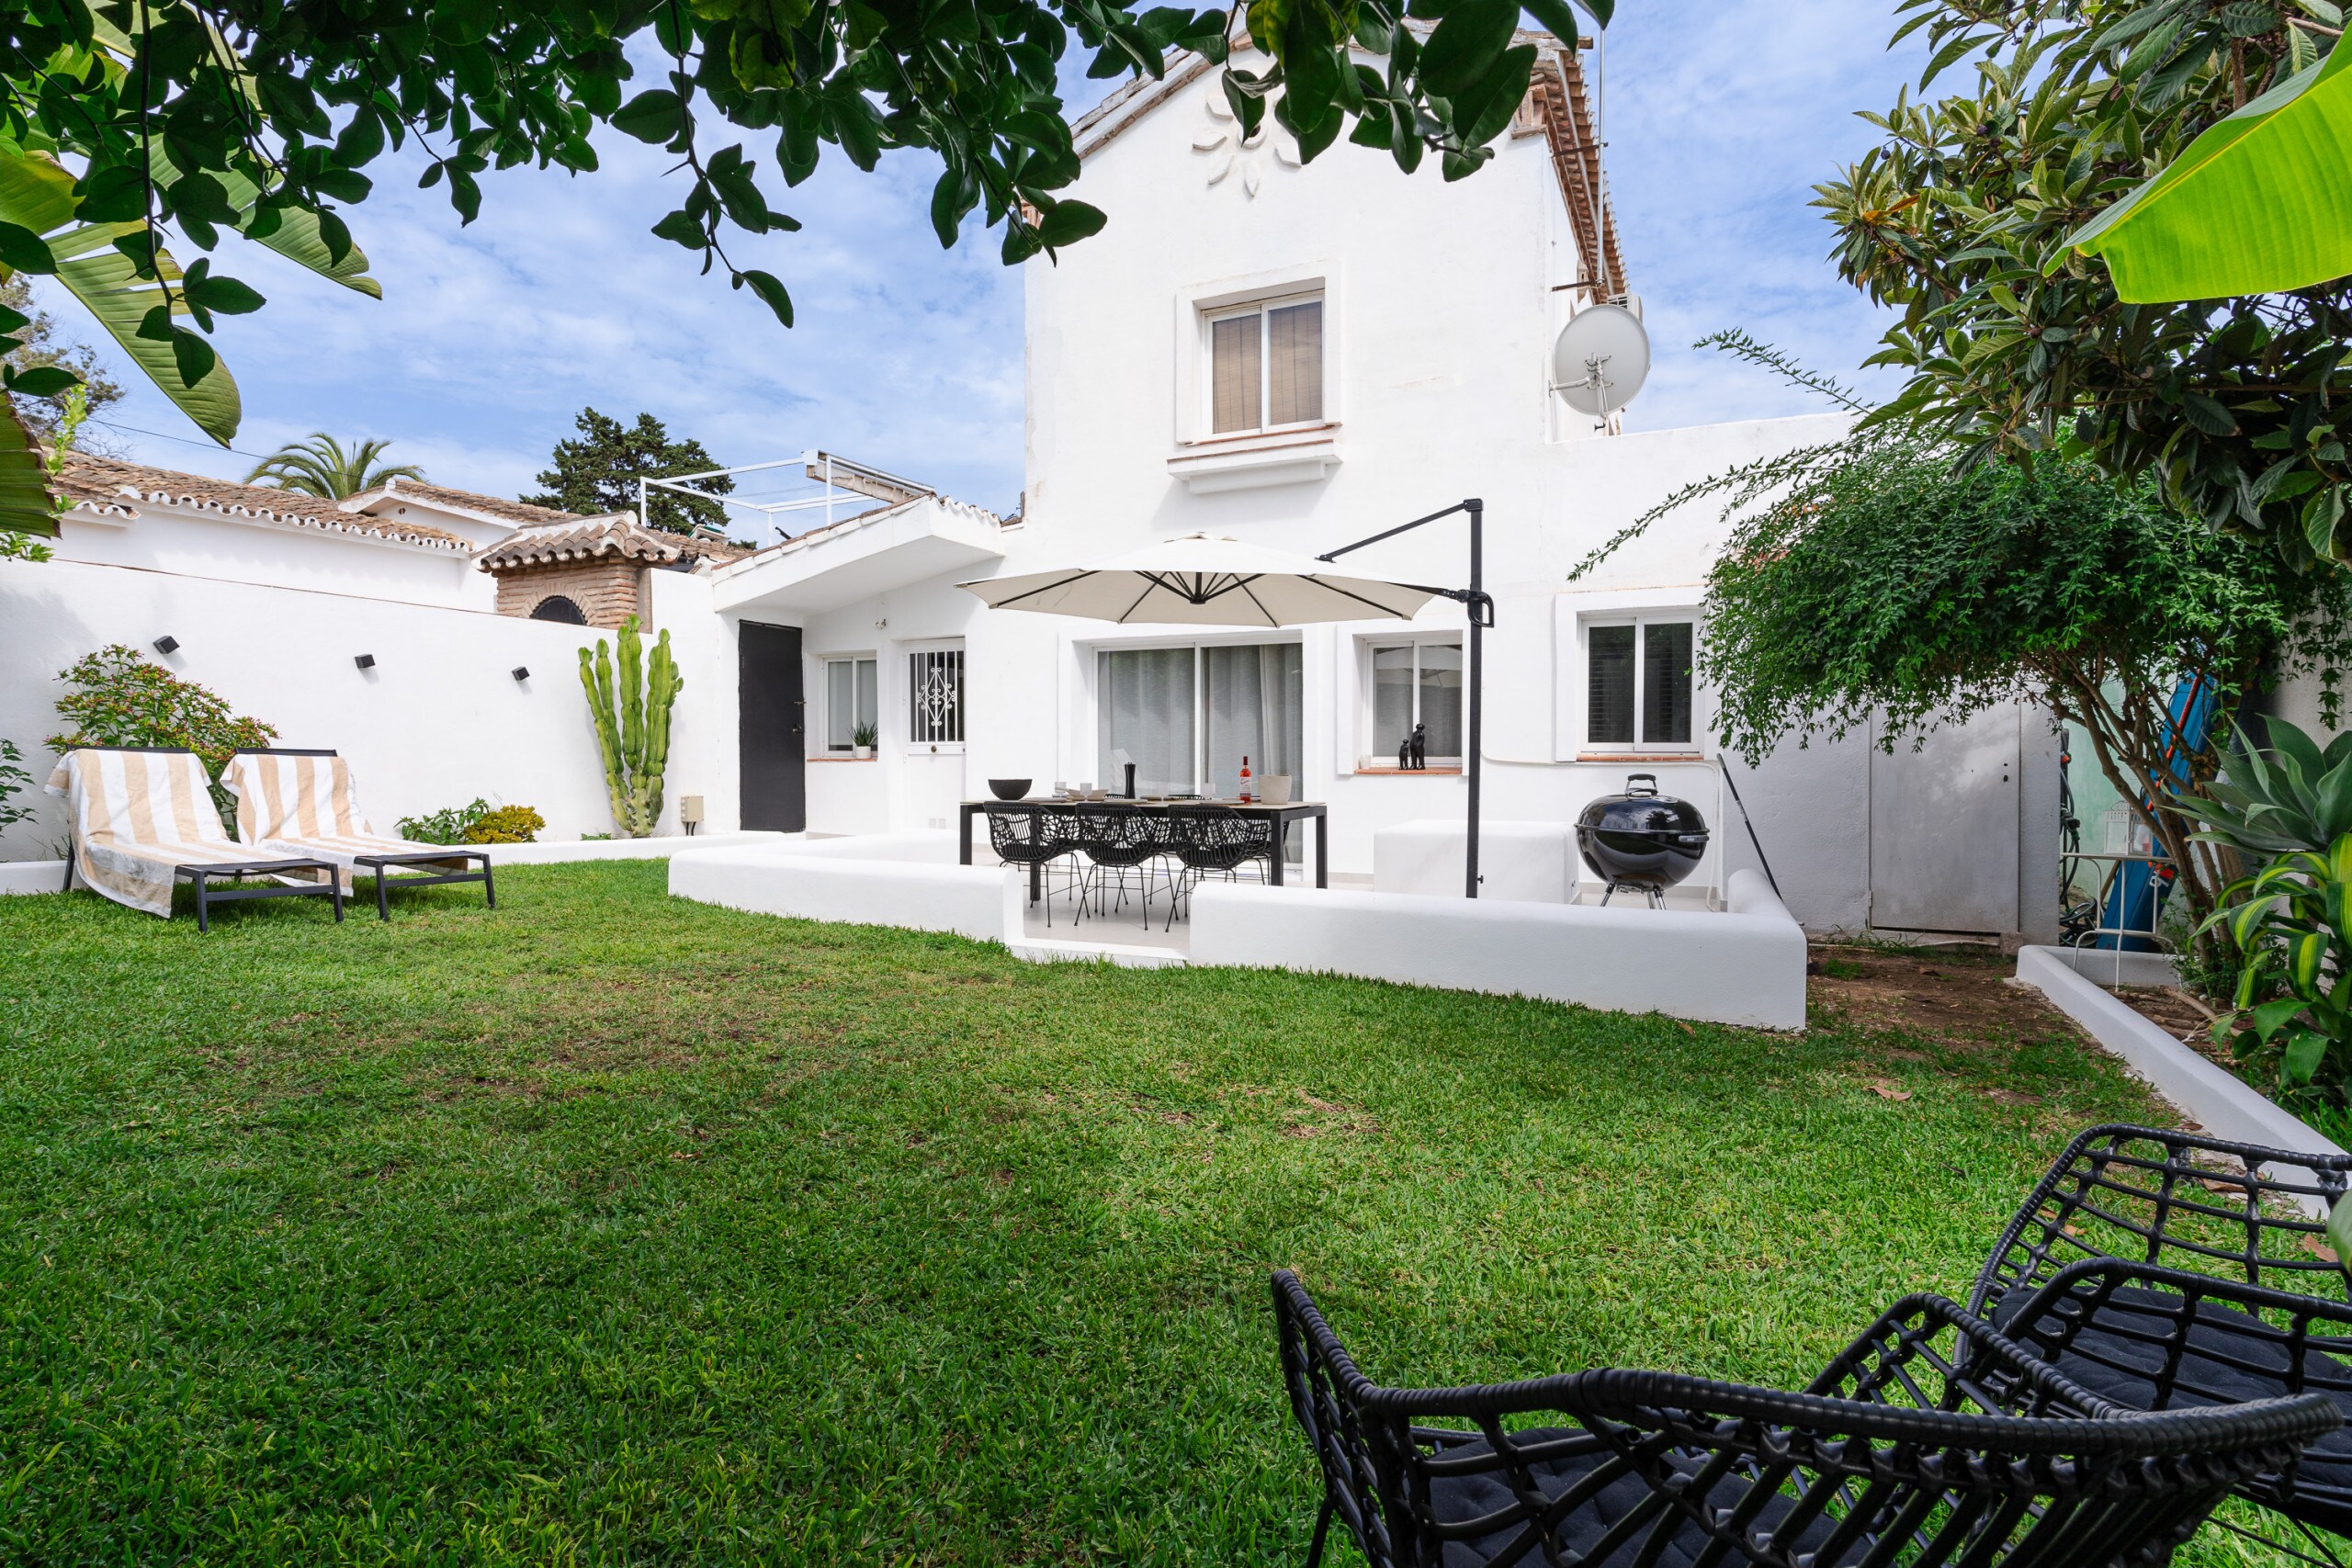 Charming house with private garden located close to the beach